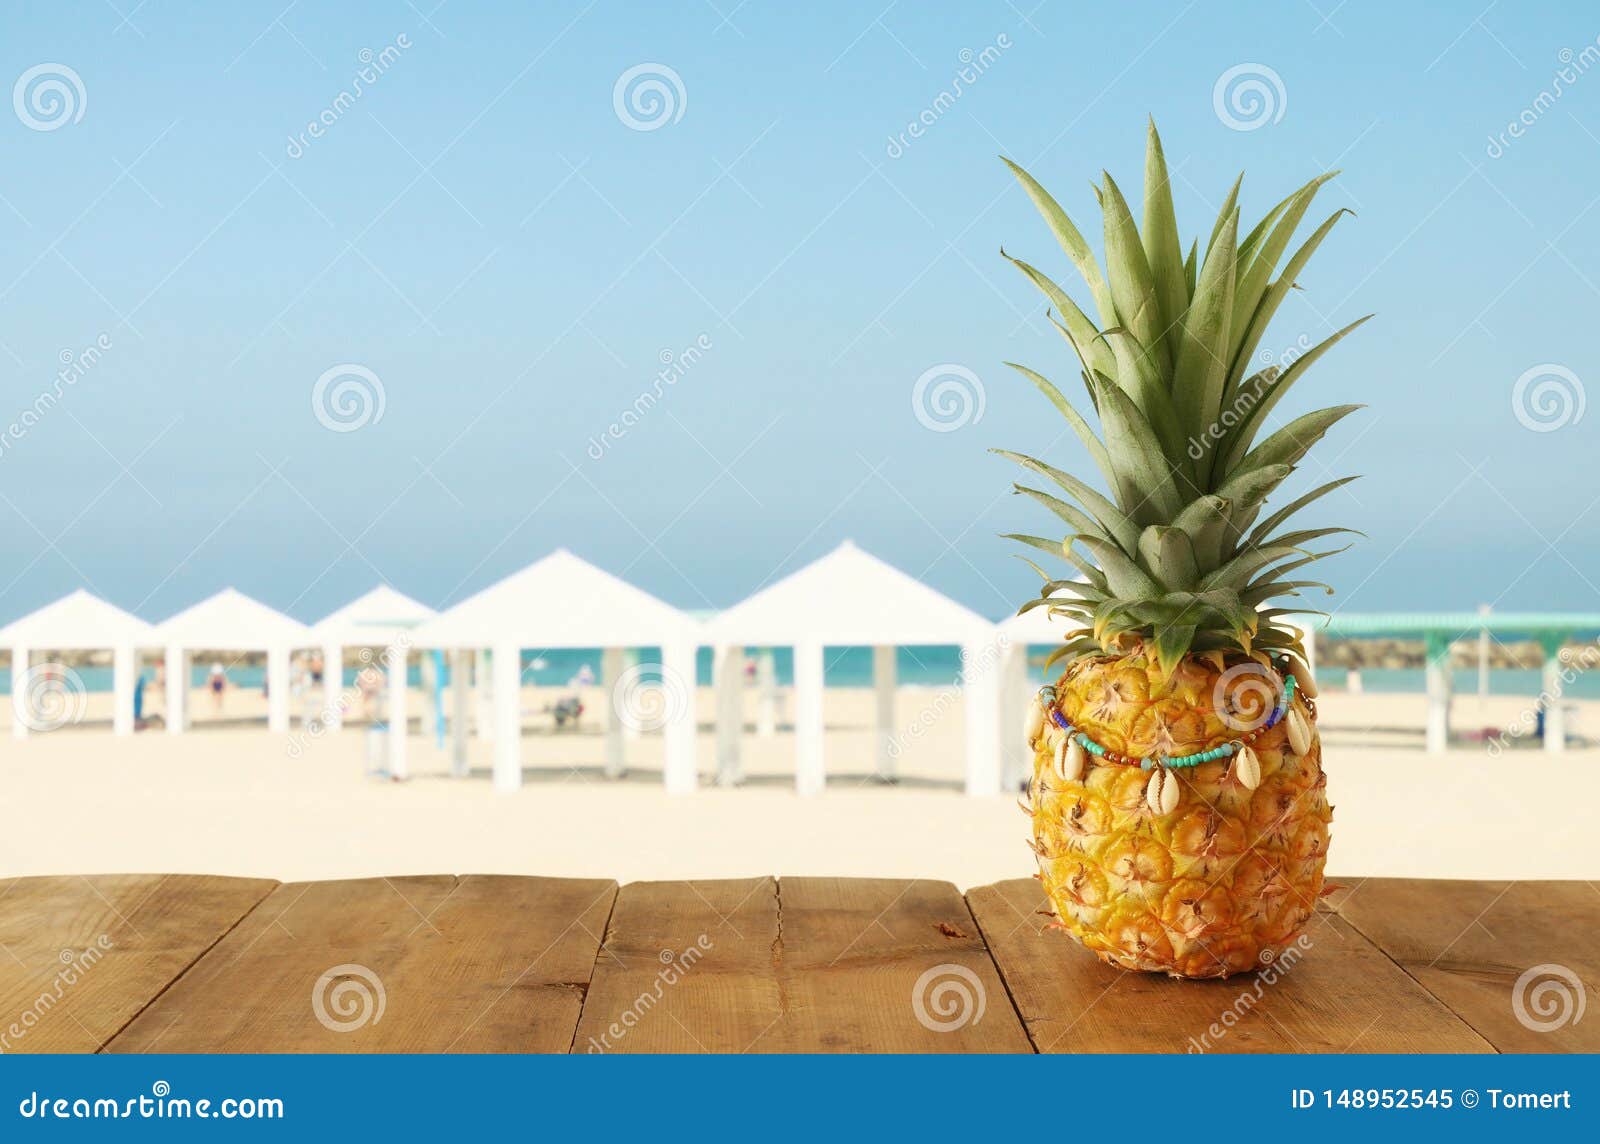 Ripe pineapple over wooden table in front of beach and tropical background.